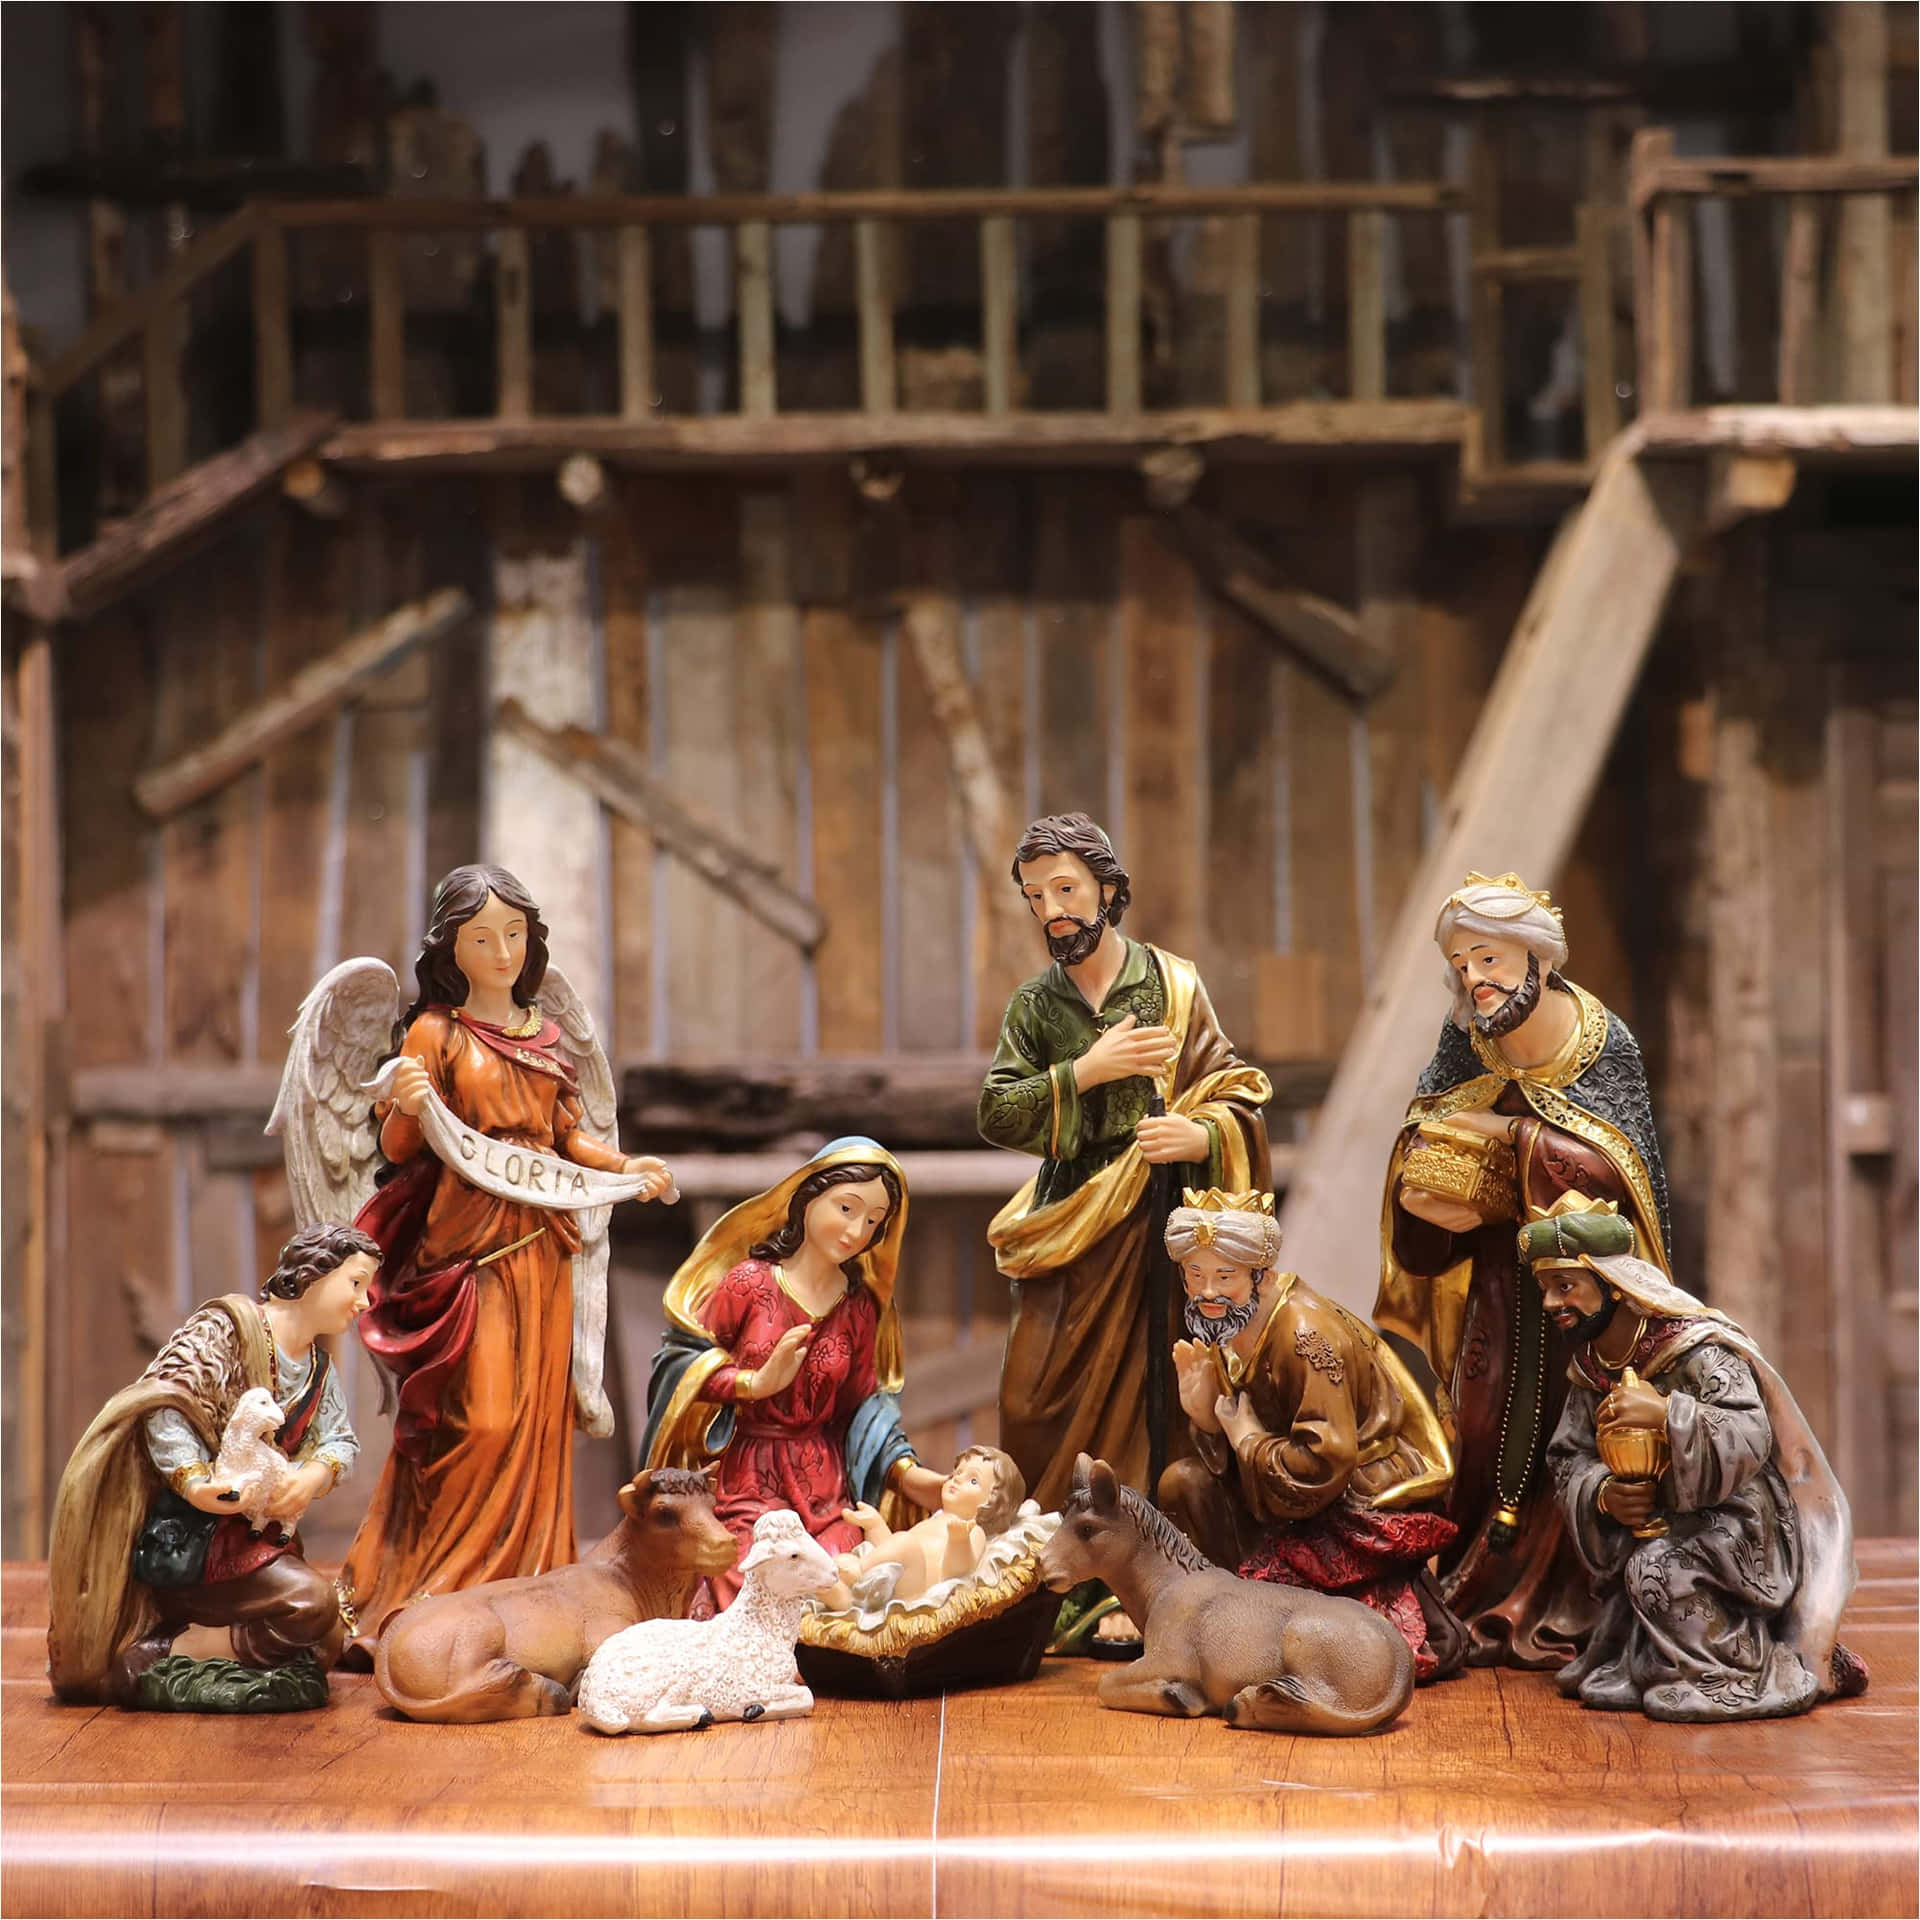 The timeless beauty of the traditional Nativity Scene - a scene familiar to many people around the world